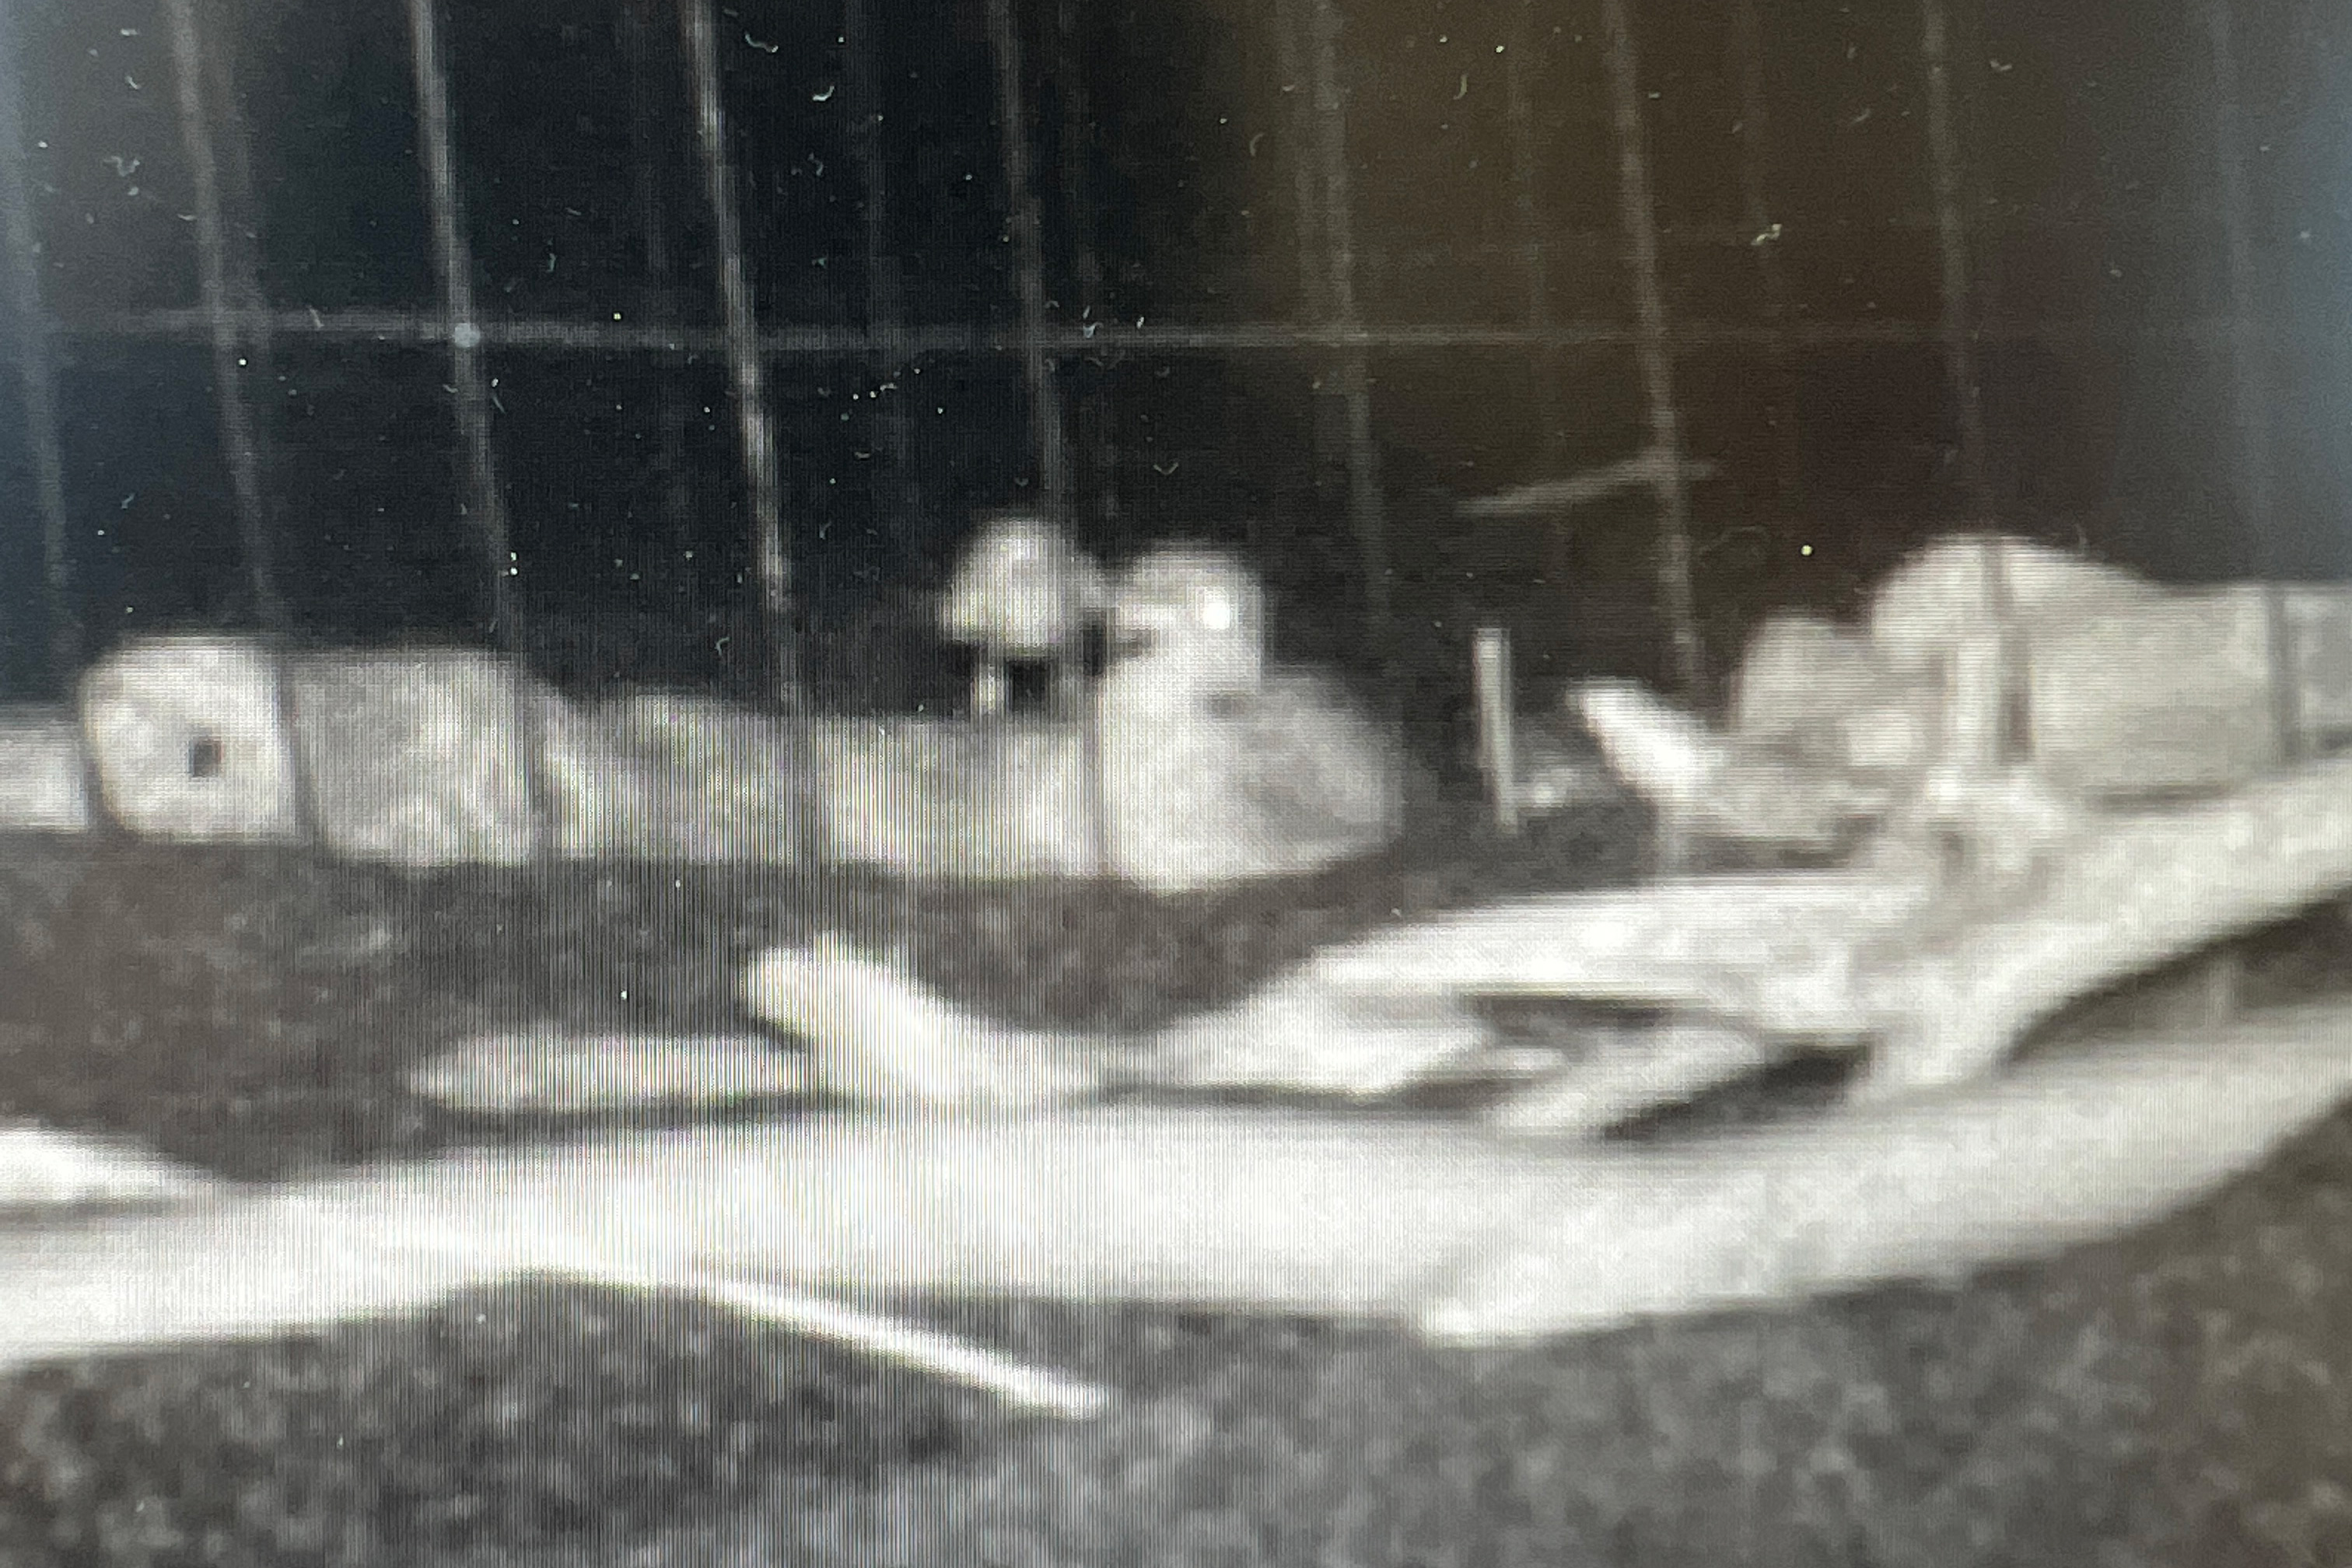 A black-and-white night-time photo of two small birds perched on a driftwood log beyond some wire fencing.